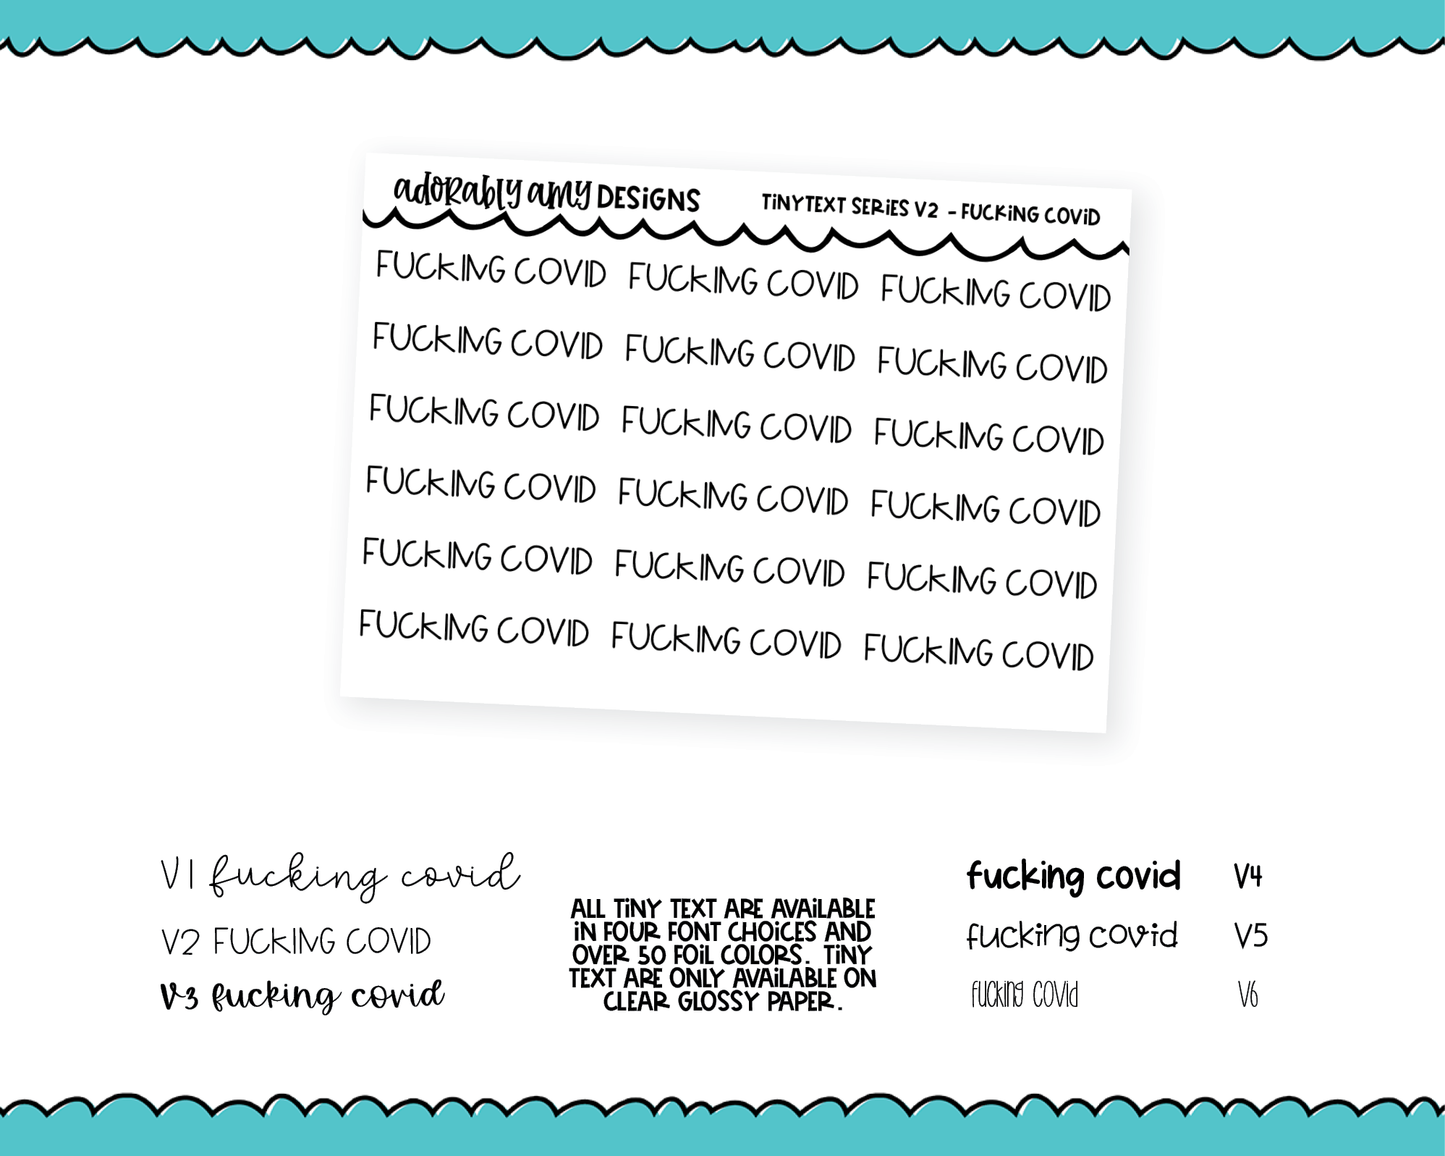 Foiled Tiny Text Series - Fucking Covid Checklist Size Planner Stickers for any Planner or Insert